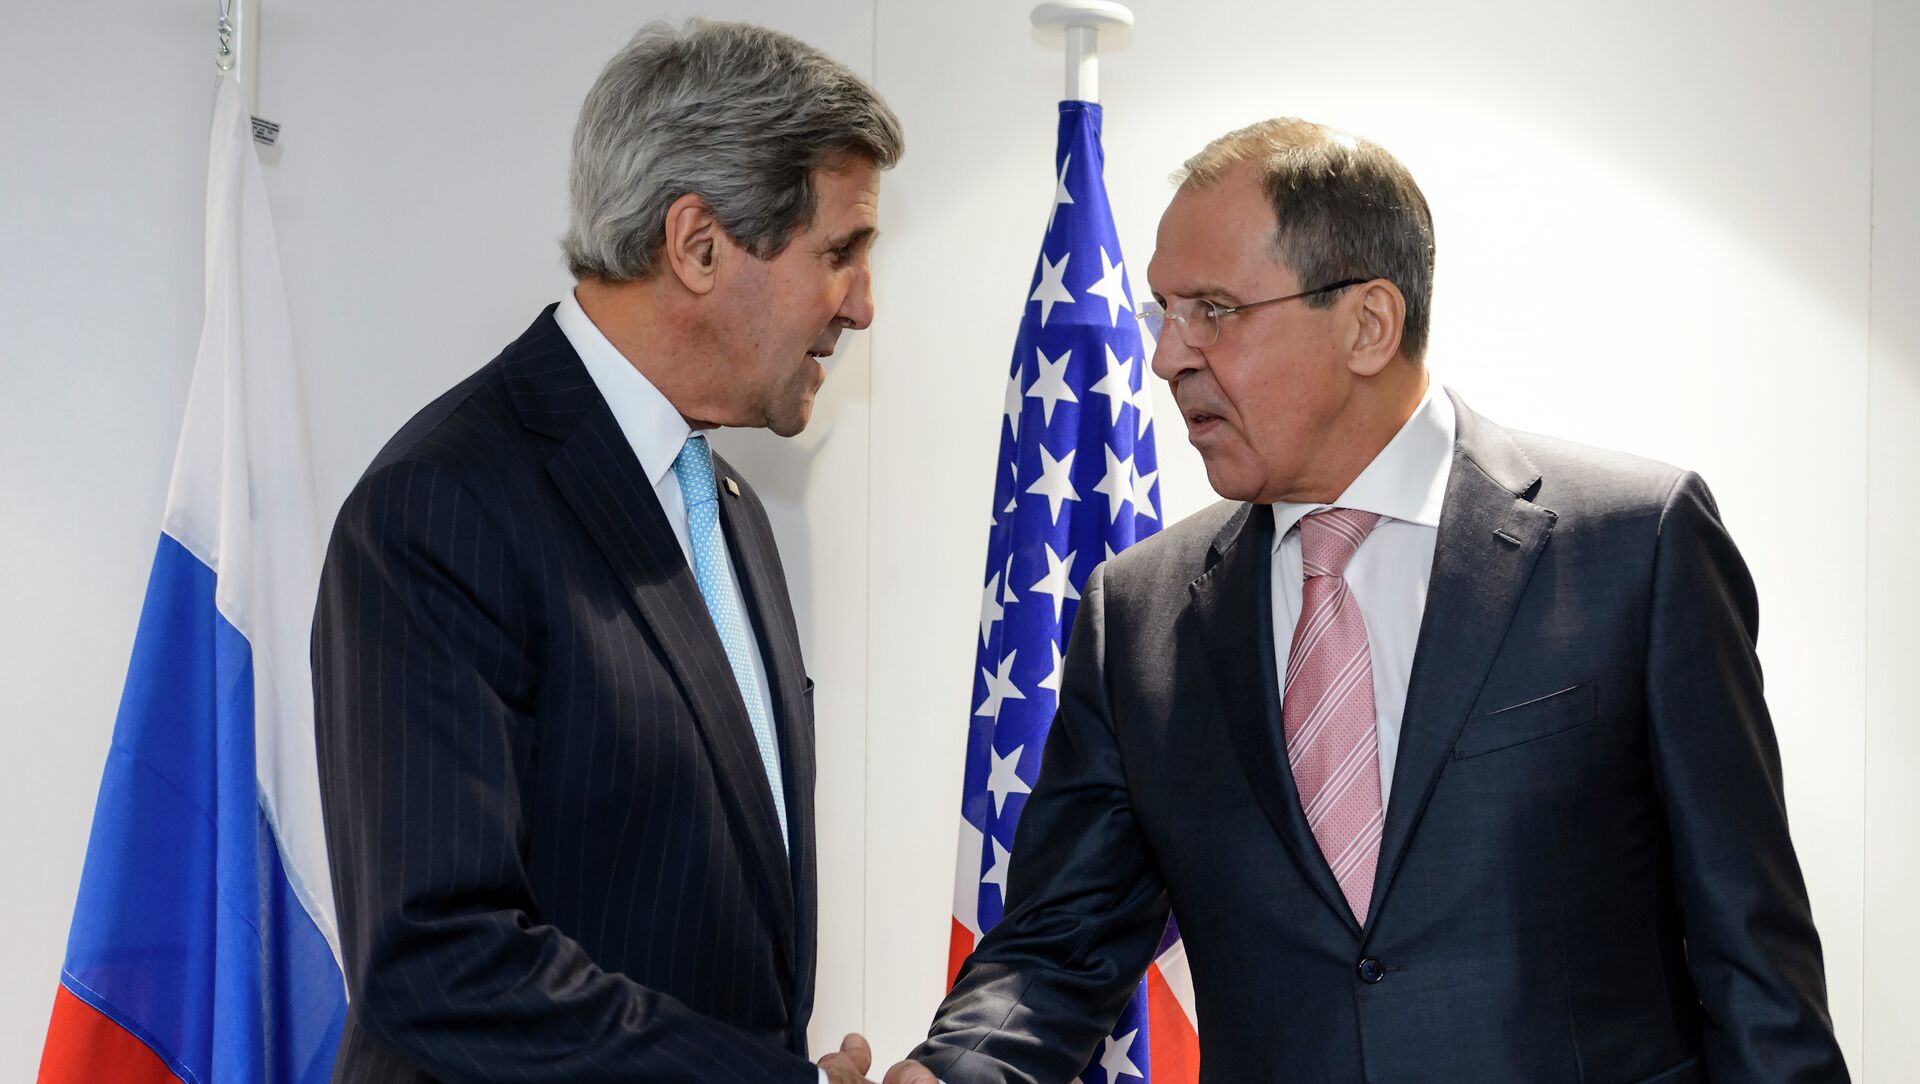 US Secretary of State John Kerry (L) and Russian Foreign Minister Sergei Lavrov shake hands during a bilateral on the side line of an Organization for Security and Cooperation in Europe (OSCE) ministerial meeting on December 4, 2014 - Sputnik Moldova, 1920, 02.07.2021